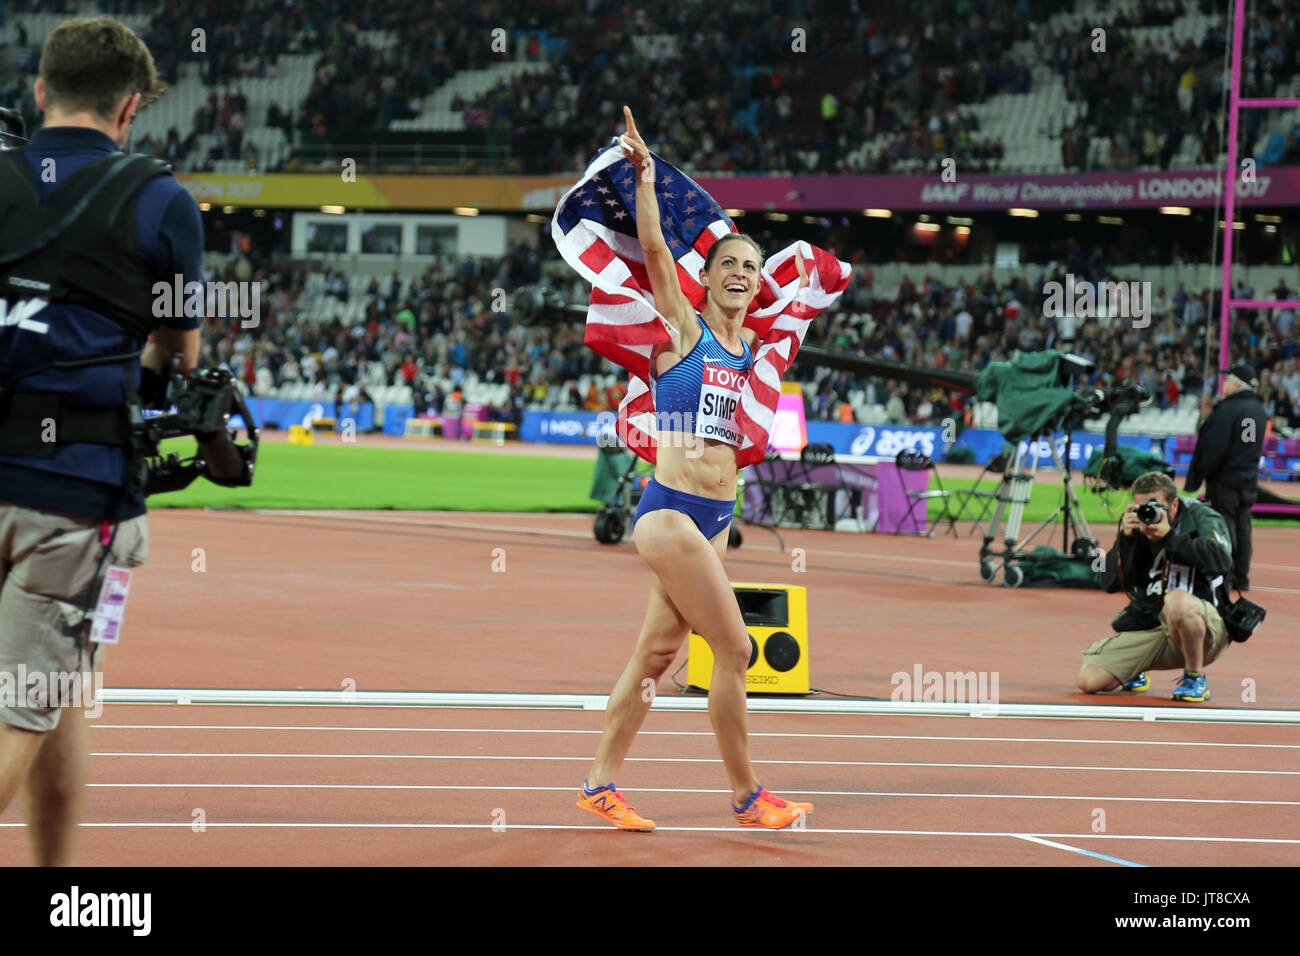 London, UK. 07-Aug-17. Jennifer SIMPSON of the USA celebrating her 2nd place the Women's 1500m Final at the 2017, IAAF World Championships, Queen Elizabeth Olympic Park, Stratford, London, UK. Credit: Simon Balson/Alamy Live News Stock Photo